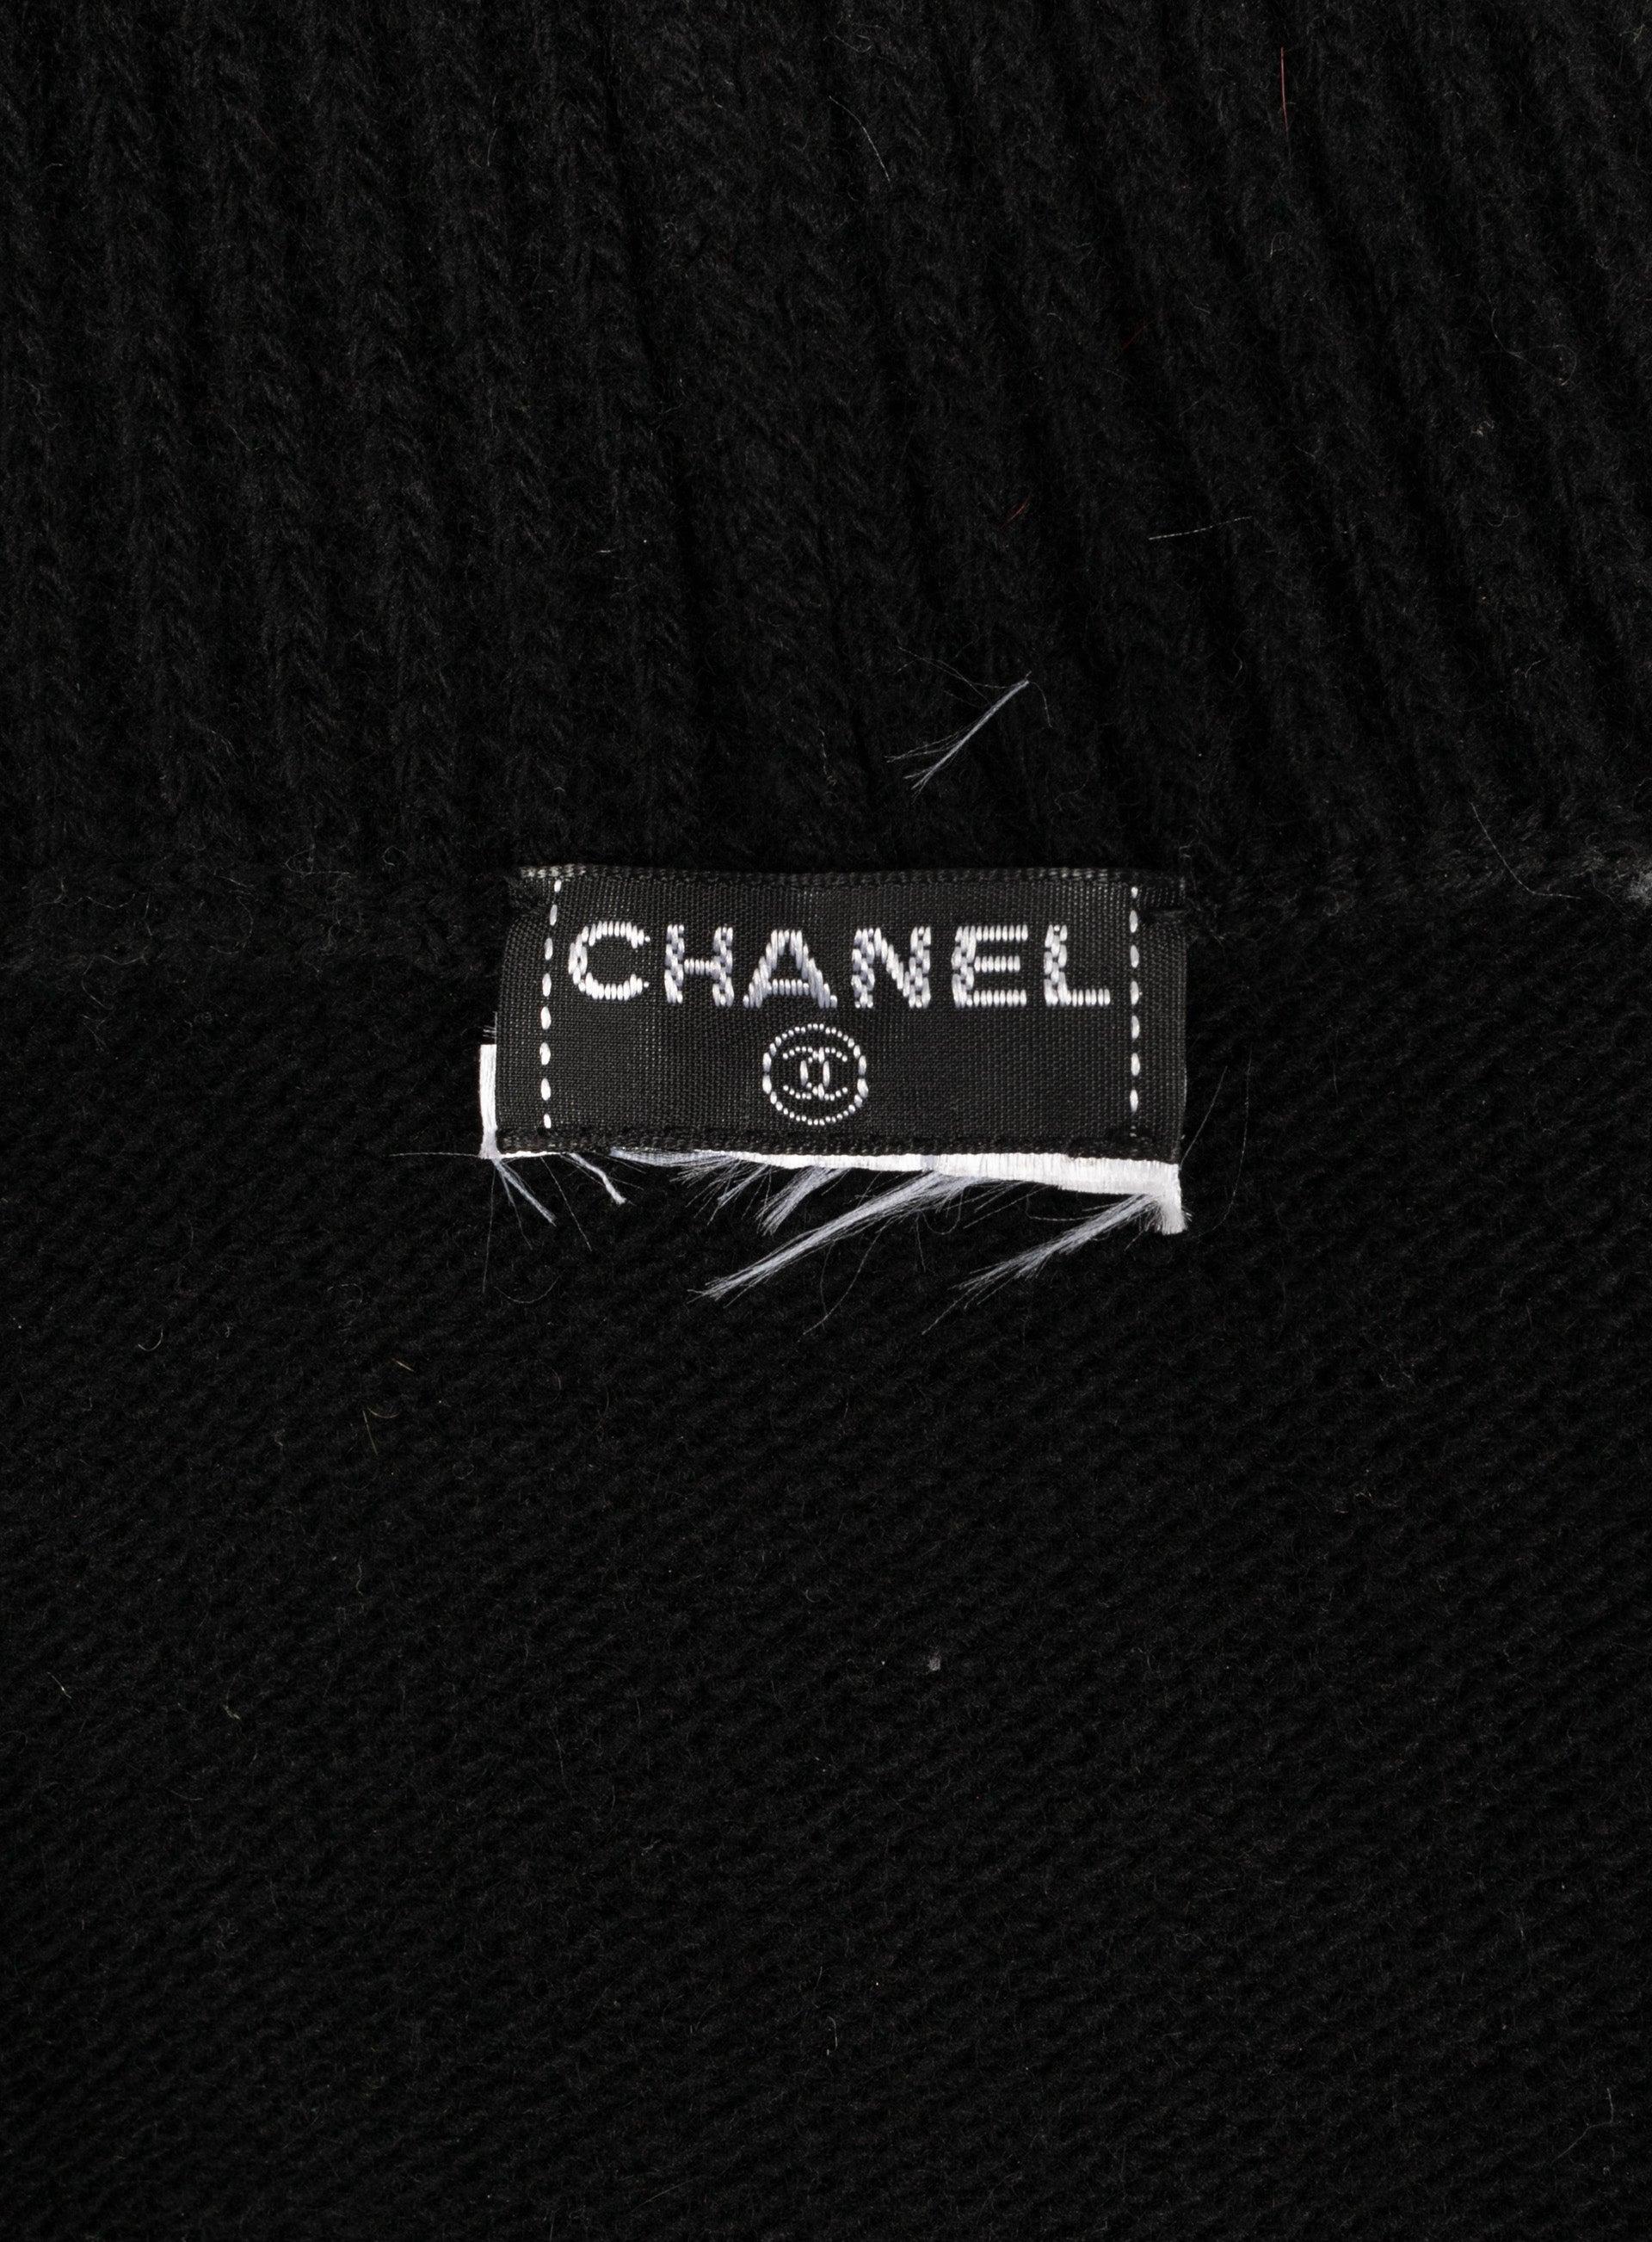 Chanel Black Wool Sweater with Snowflake Decorations 4